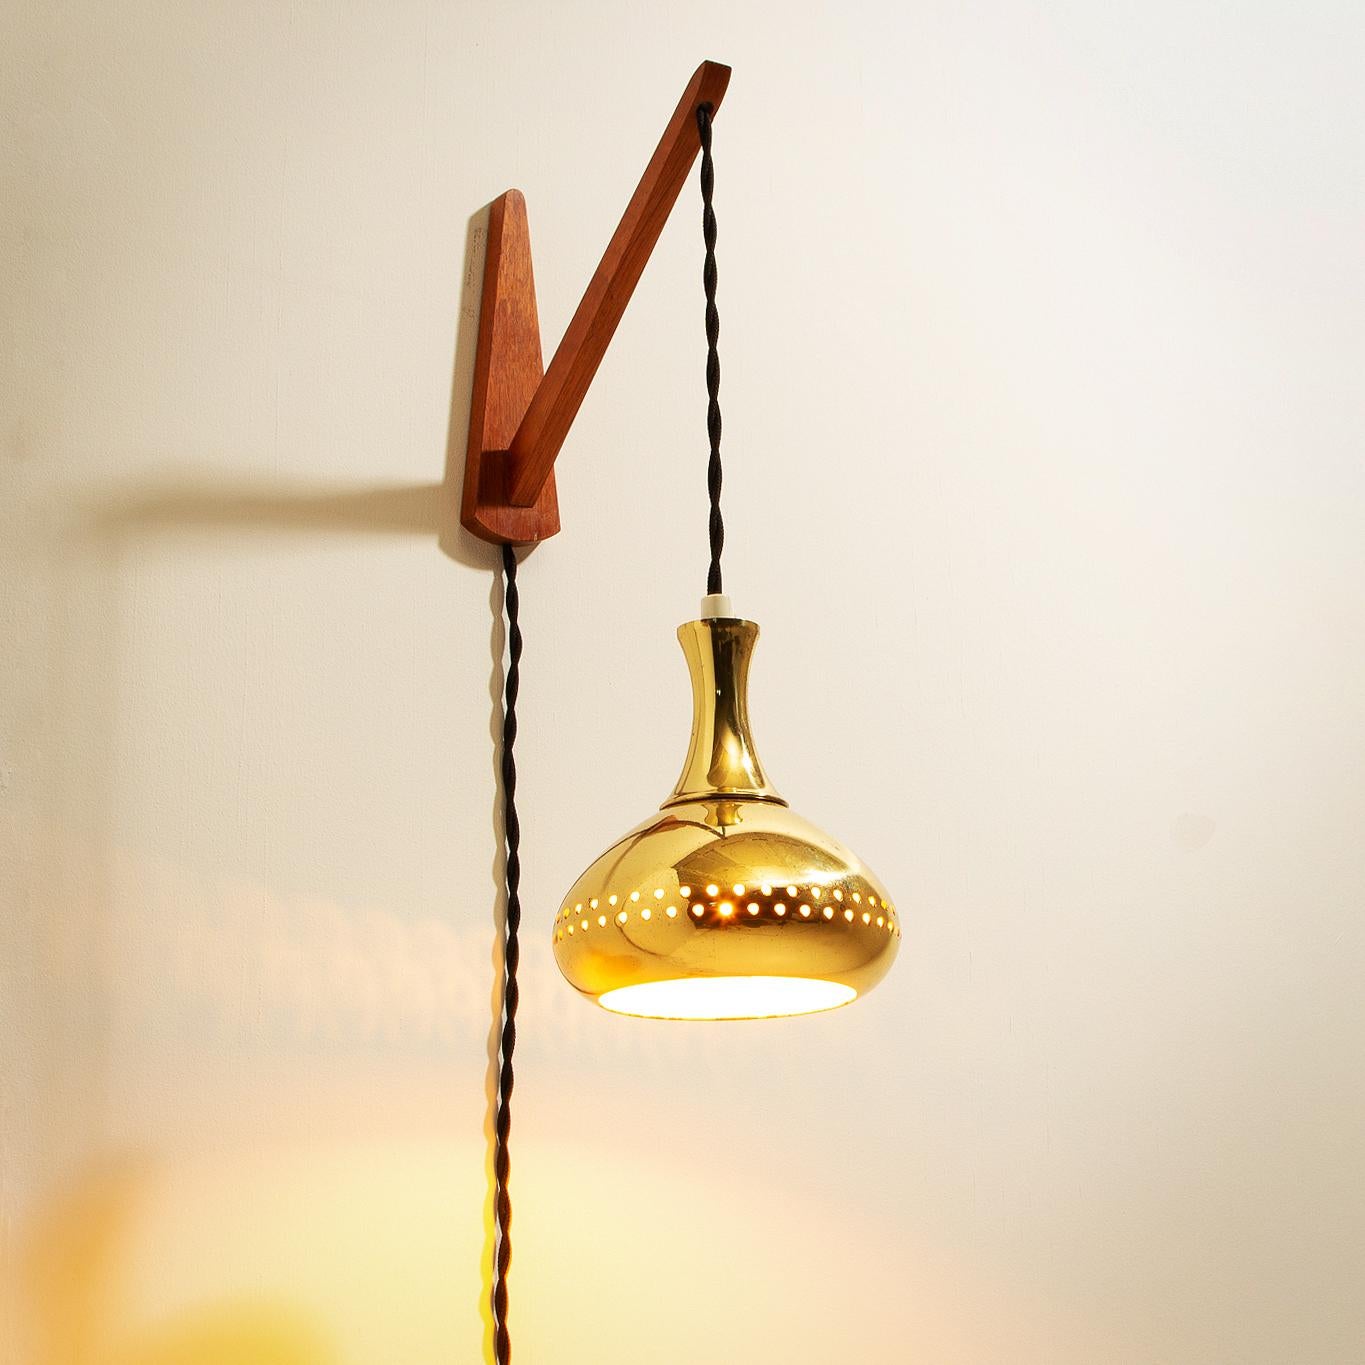 Mid-Century Modern Perforated Brass Pendant Wall Light by Hans-Agne Jakobsson, Sweden, 1950s